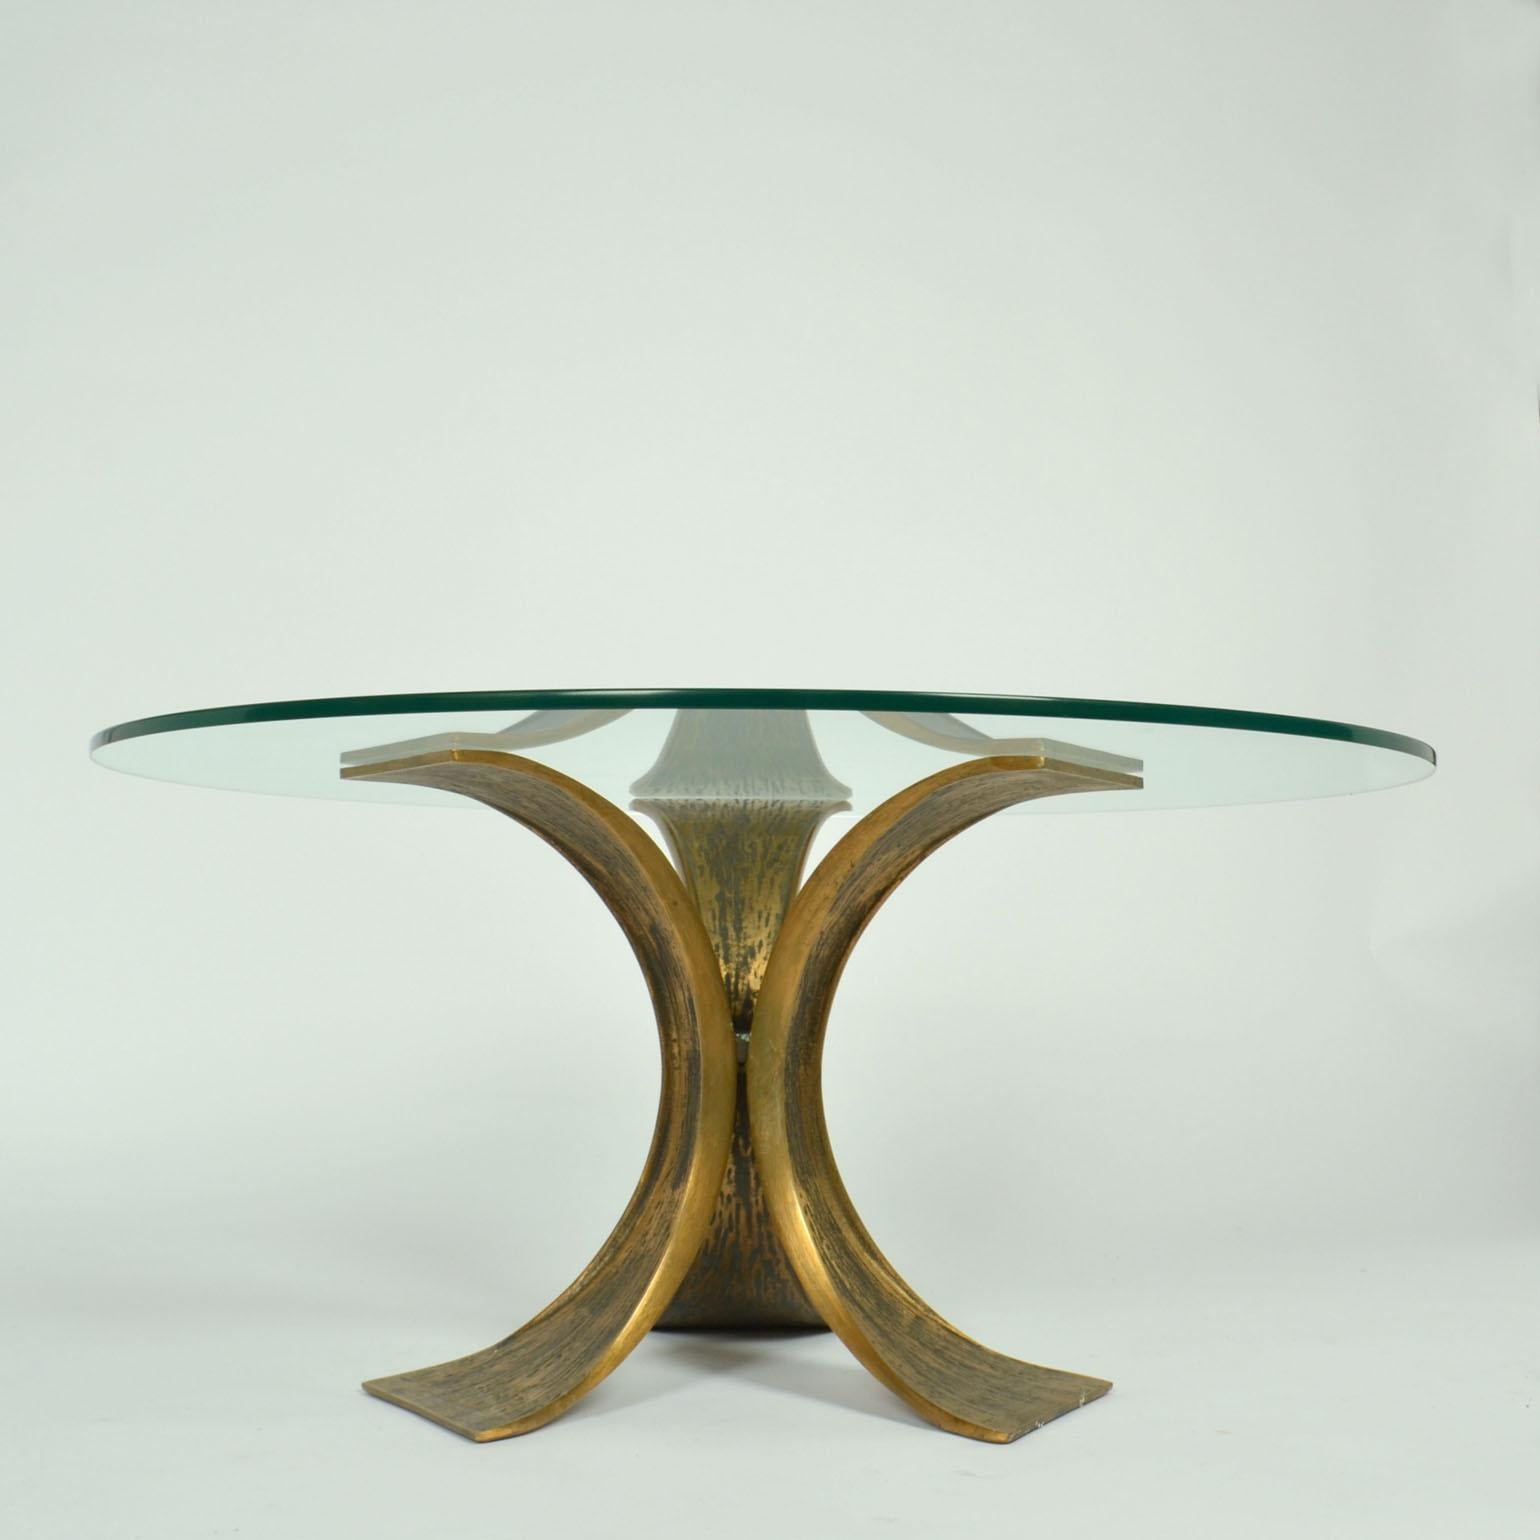 Sculptural winged bronze round table with glass top by Luciano Frigeriom born in Desio in 1928..
The table base is made of three bronze butterfly shaped arms are connected together in a hexagonal center. Their wings anchor to the ground.